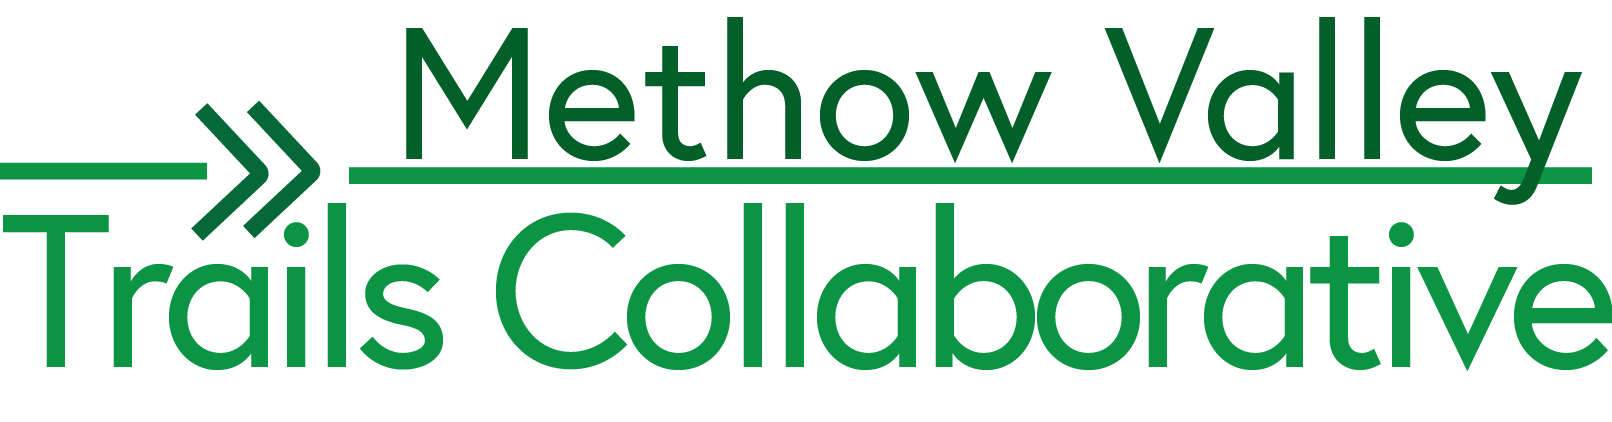 Methow Valley Trails Collaborative logo